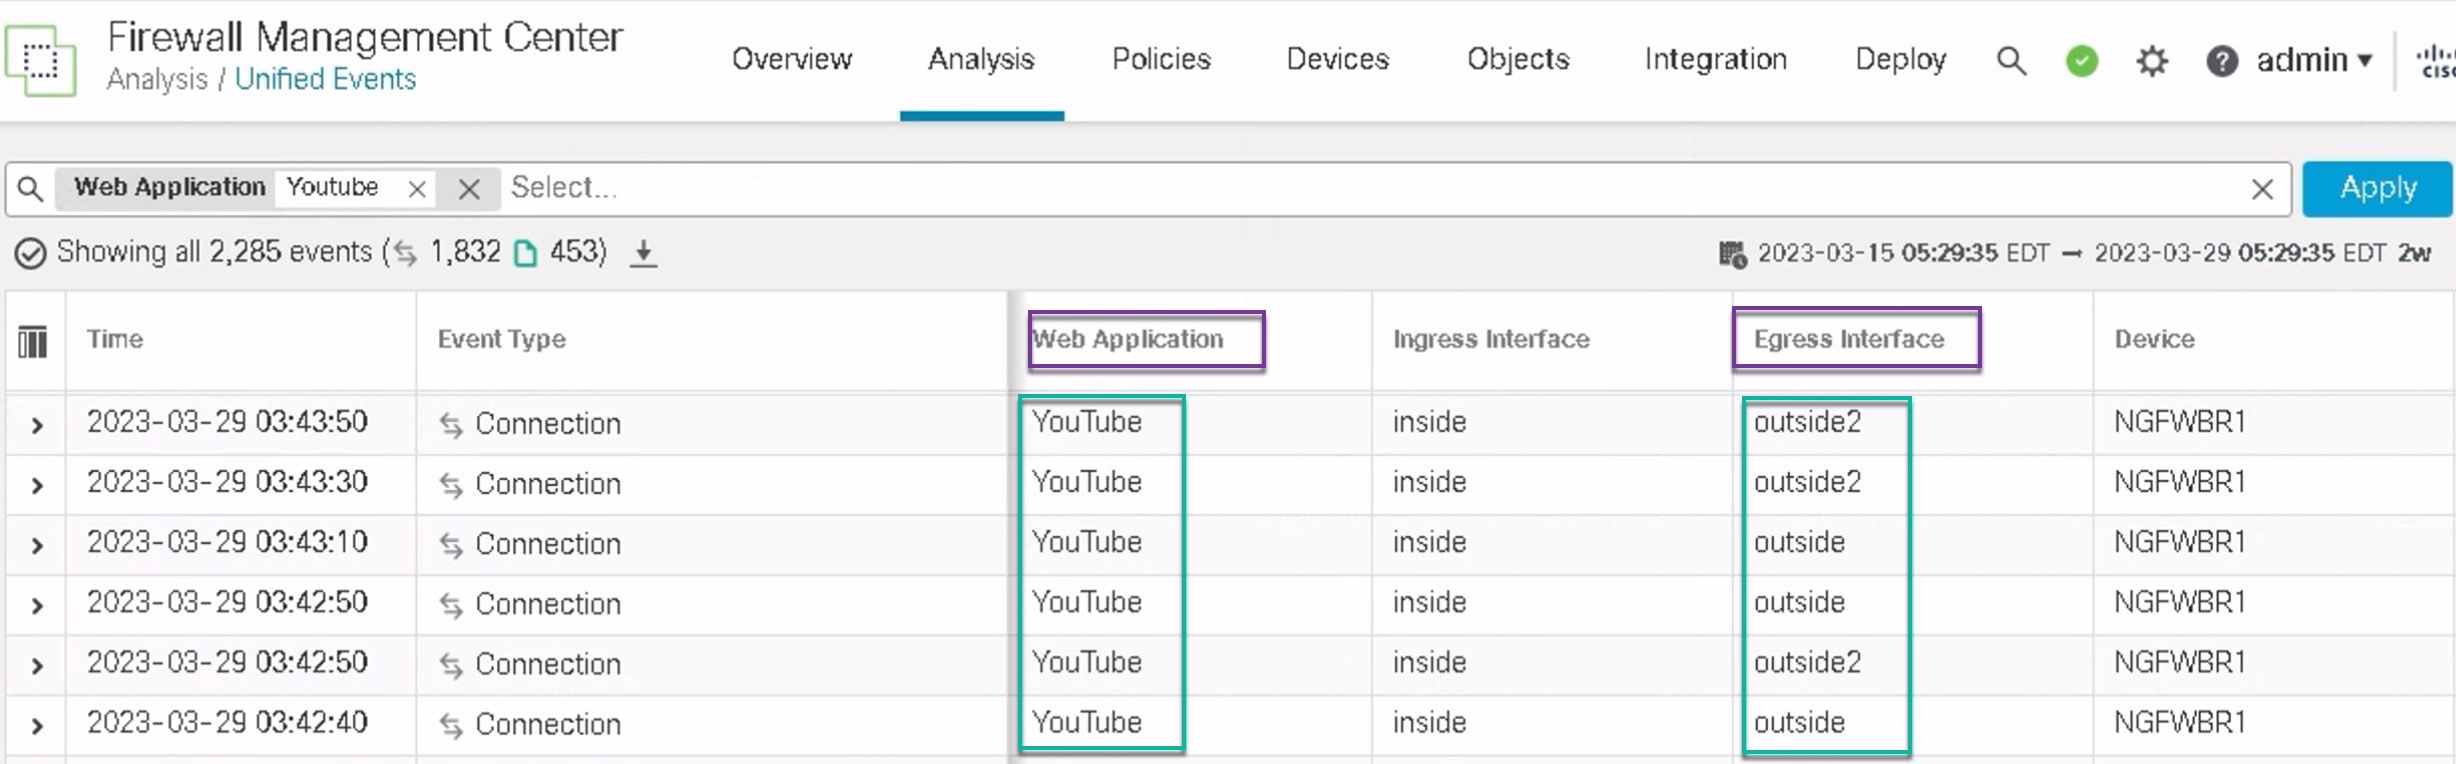 In the image, YouTube application traffic is load balanced between the outside and outside2 interfaces as seen on the Unified events page.